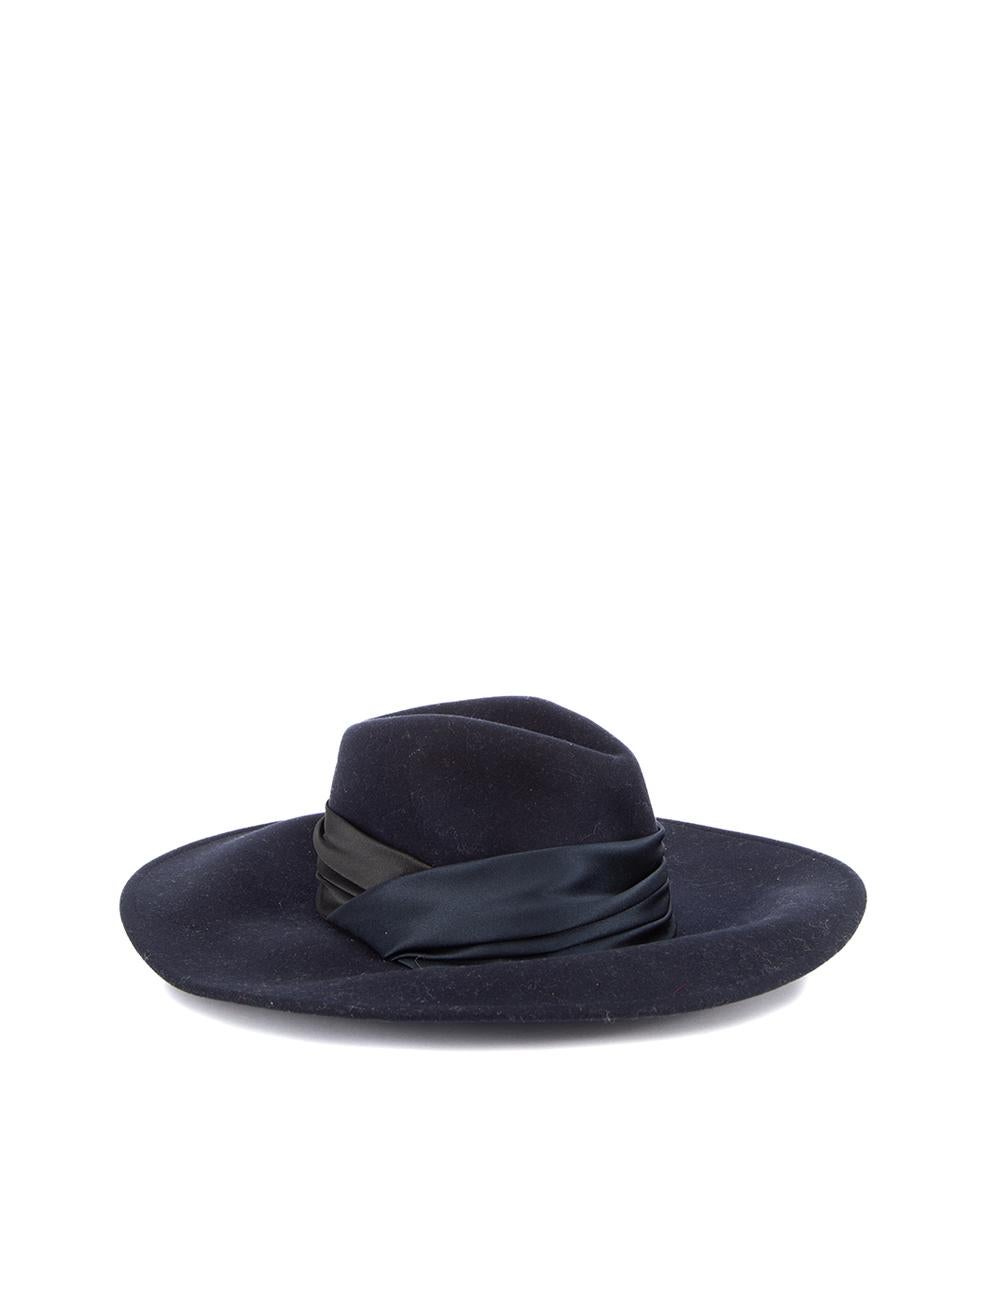 CONDITION is Very good. Minimal wear to hat is evident. Minimal wear to the outer fabric which attracts fluff and loose thread on this used Eugenia Kim designer resale item. Details Navy Wool Fedora hat Wide brim Adjustable drawstring on inner Made